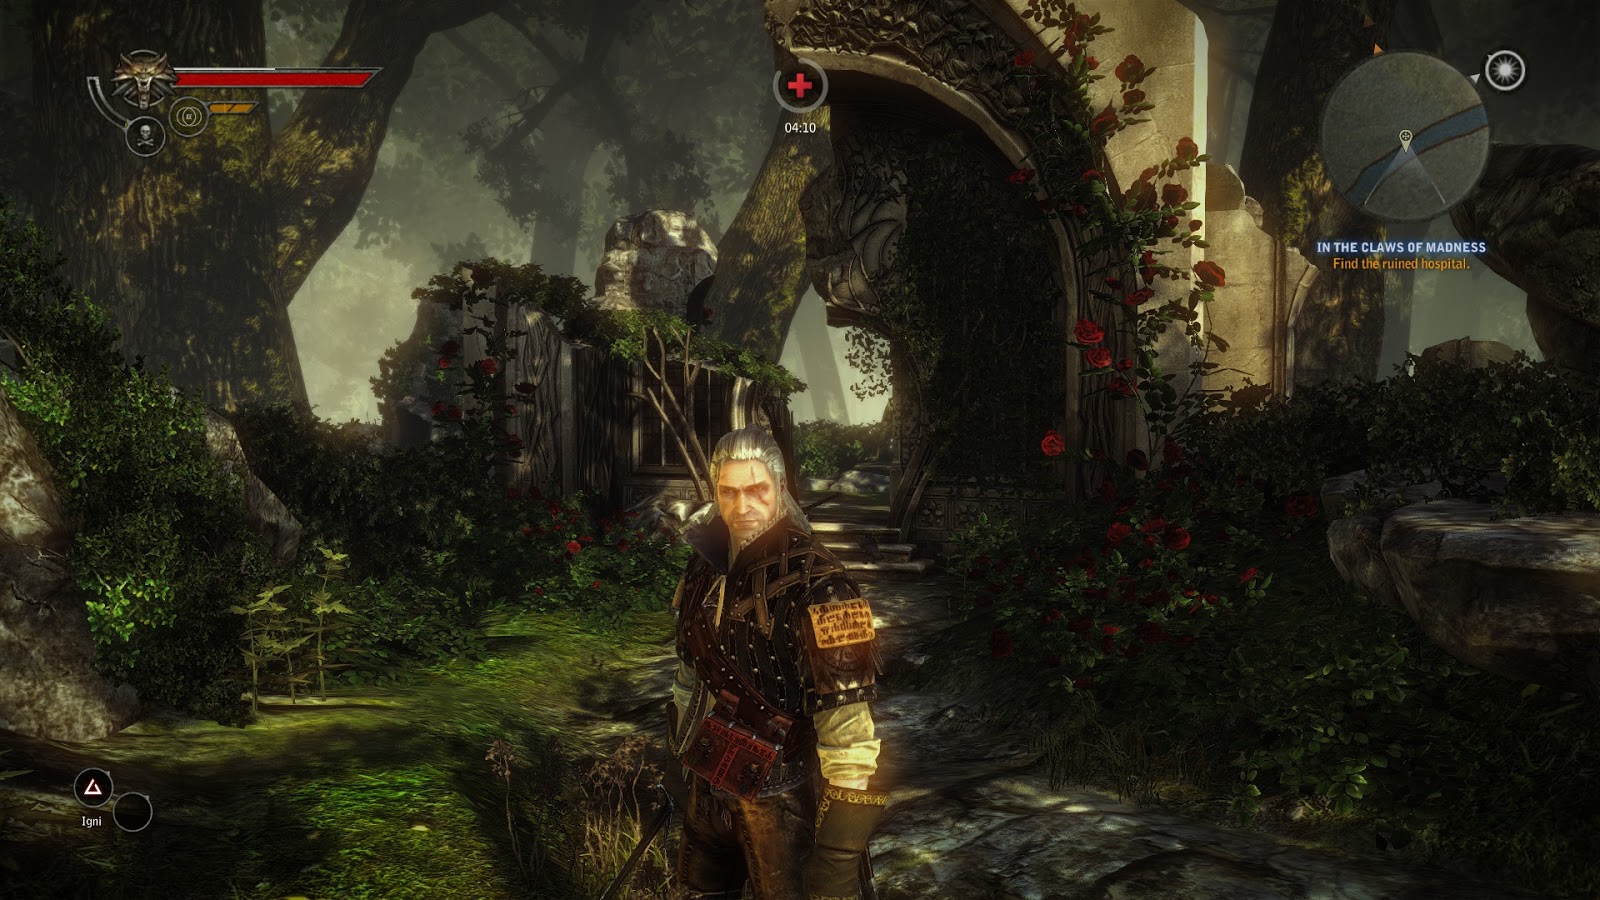 The Nocturnal Rambler: The Witcher vs The Witcher 2